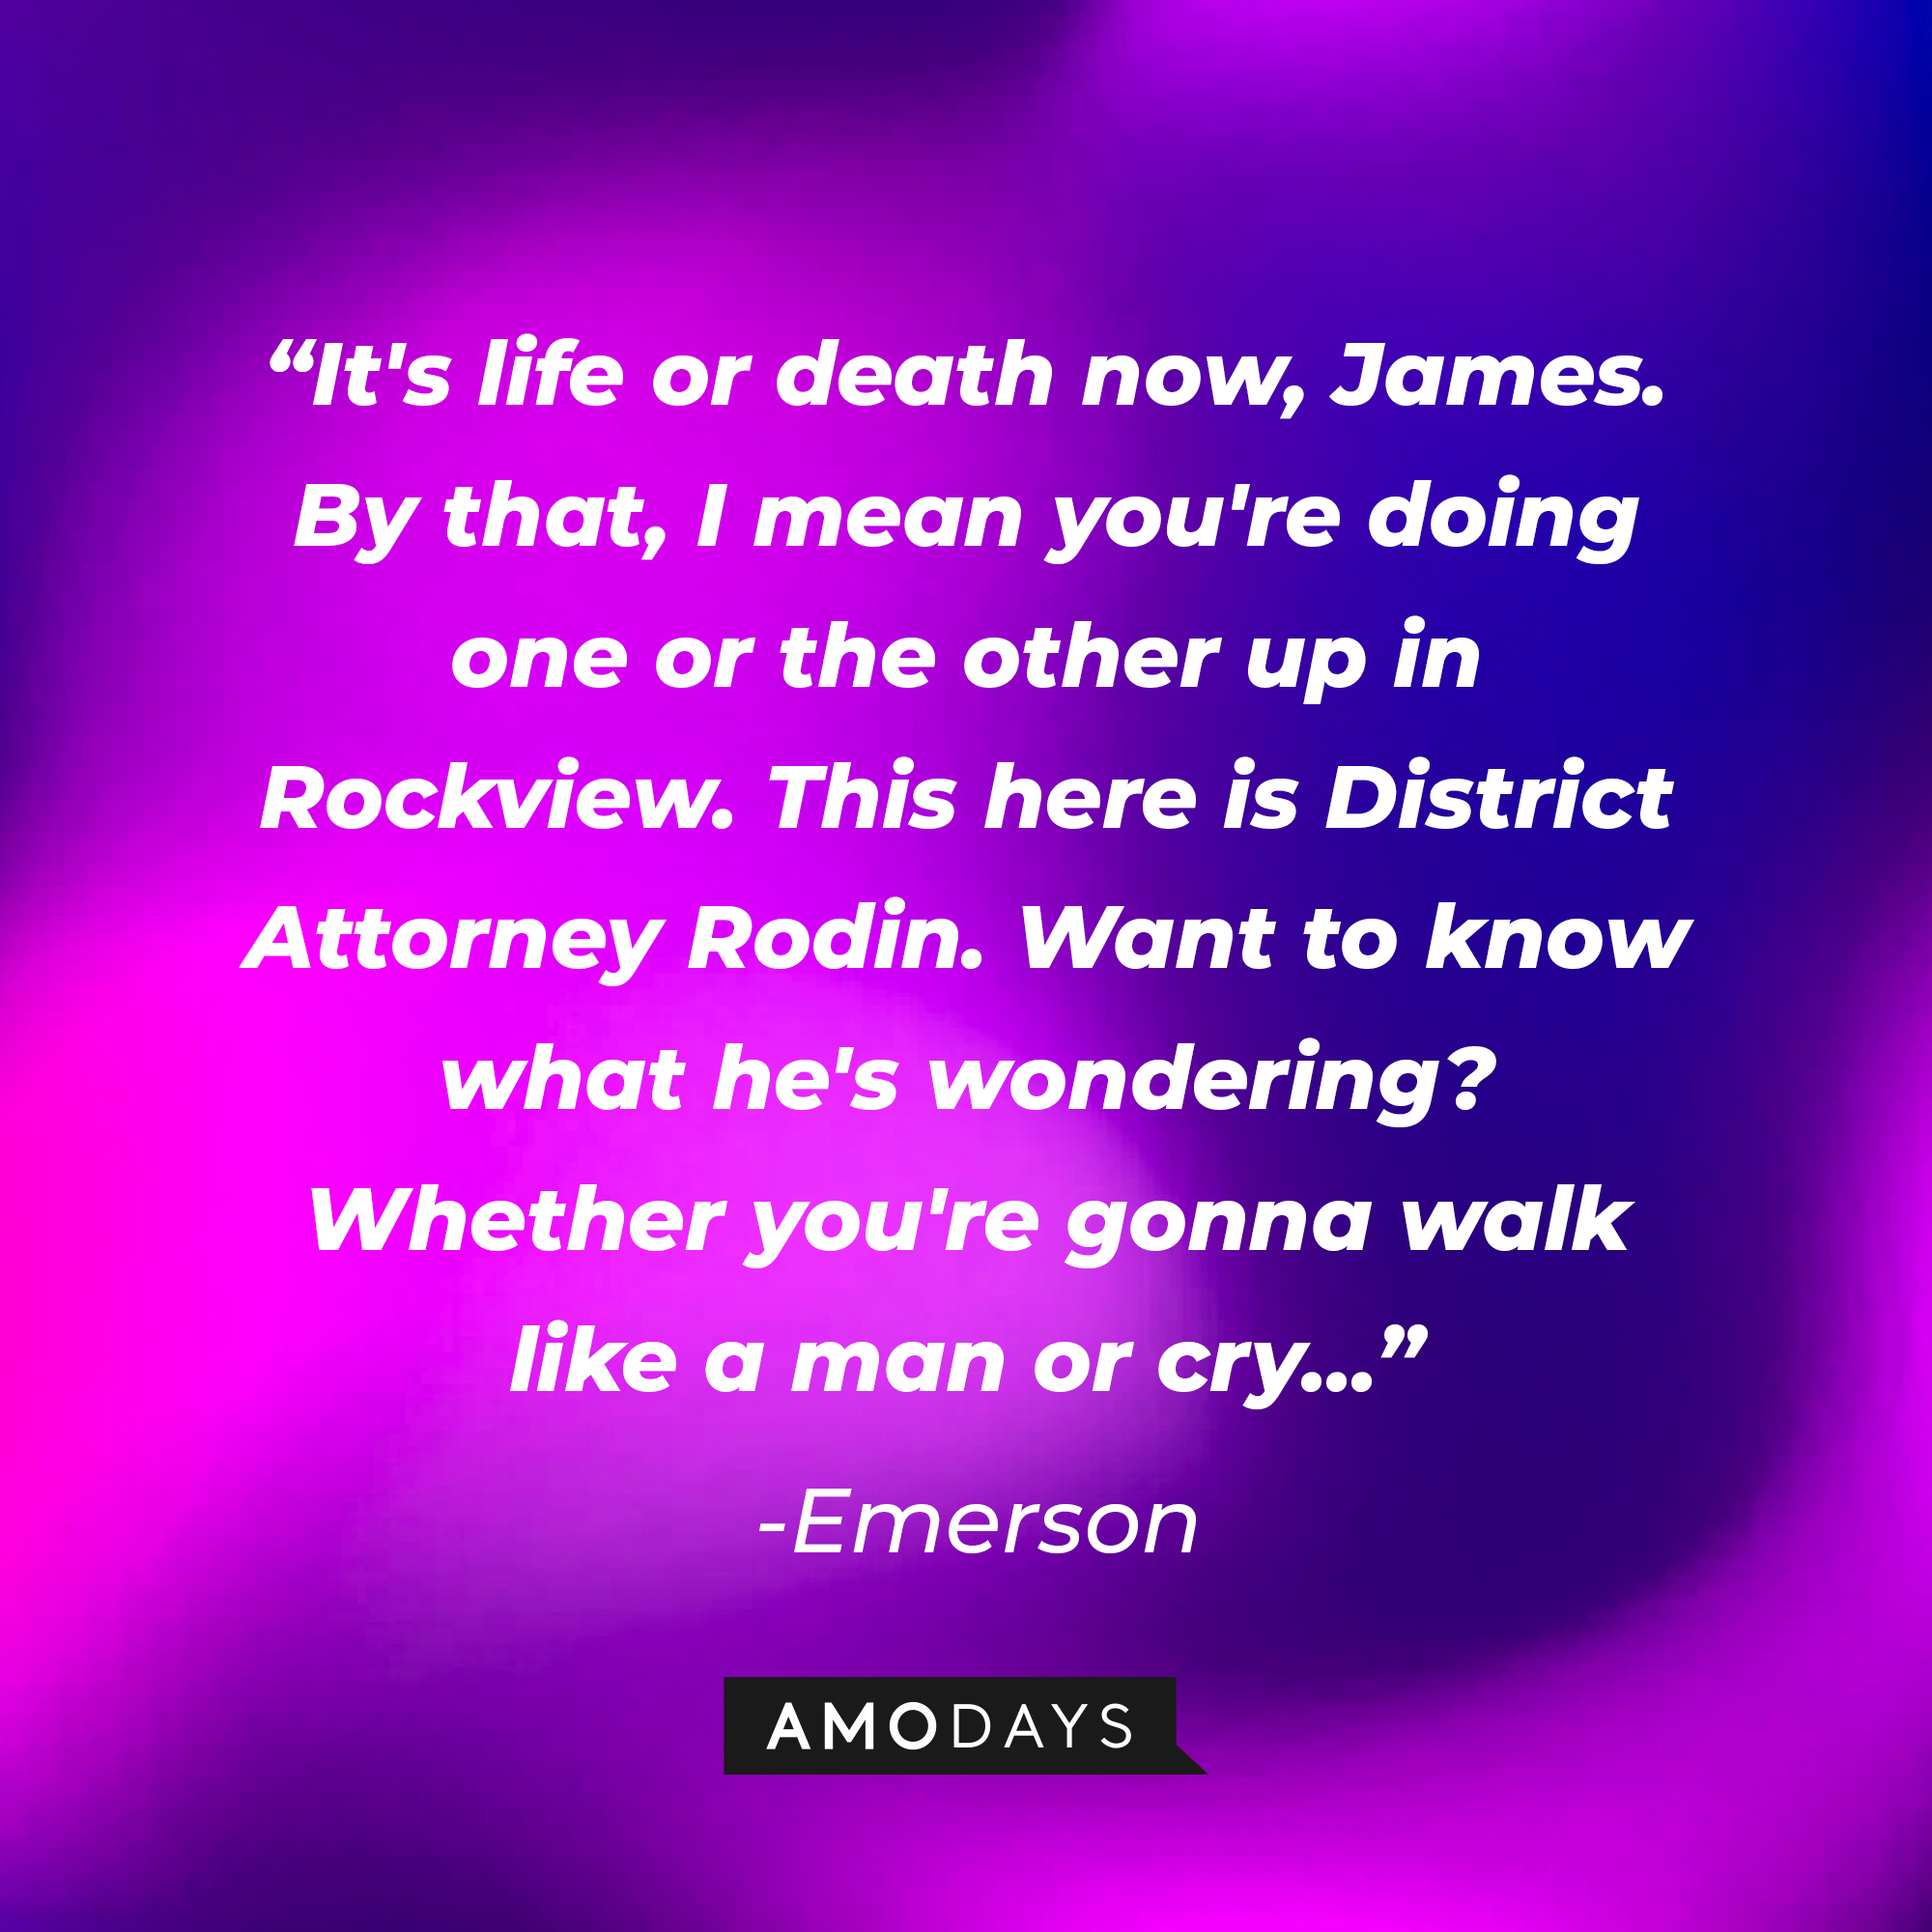 Emerson's quote: "It's life or death now, James. By that, I mean you're doing one or the other up in Rockview. This here is District Attorney Rodin. Want to know what he's wondering? Whether you're gonna walk like a man or cry..." | Source: Amodays